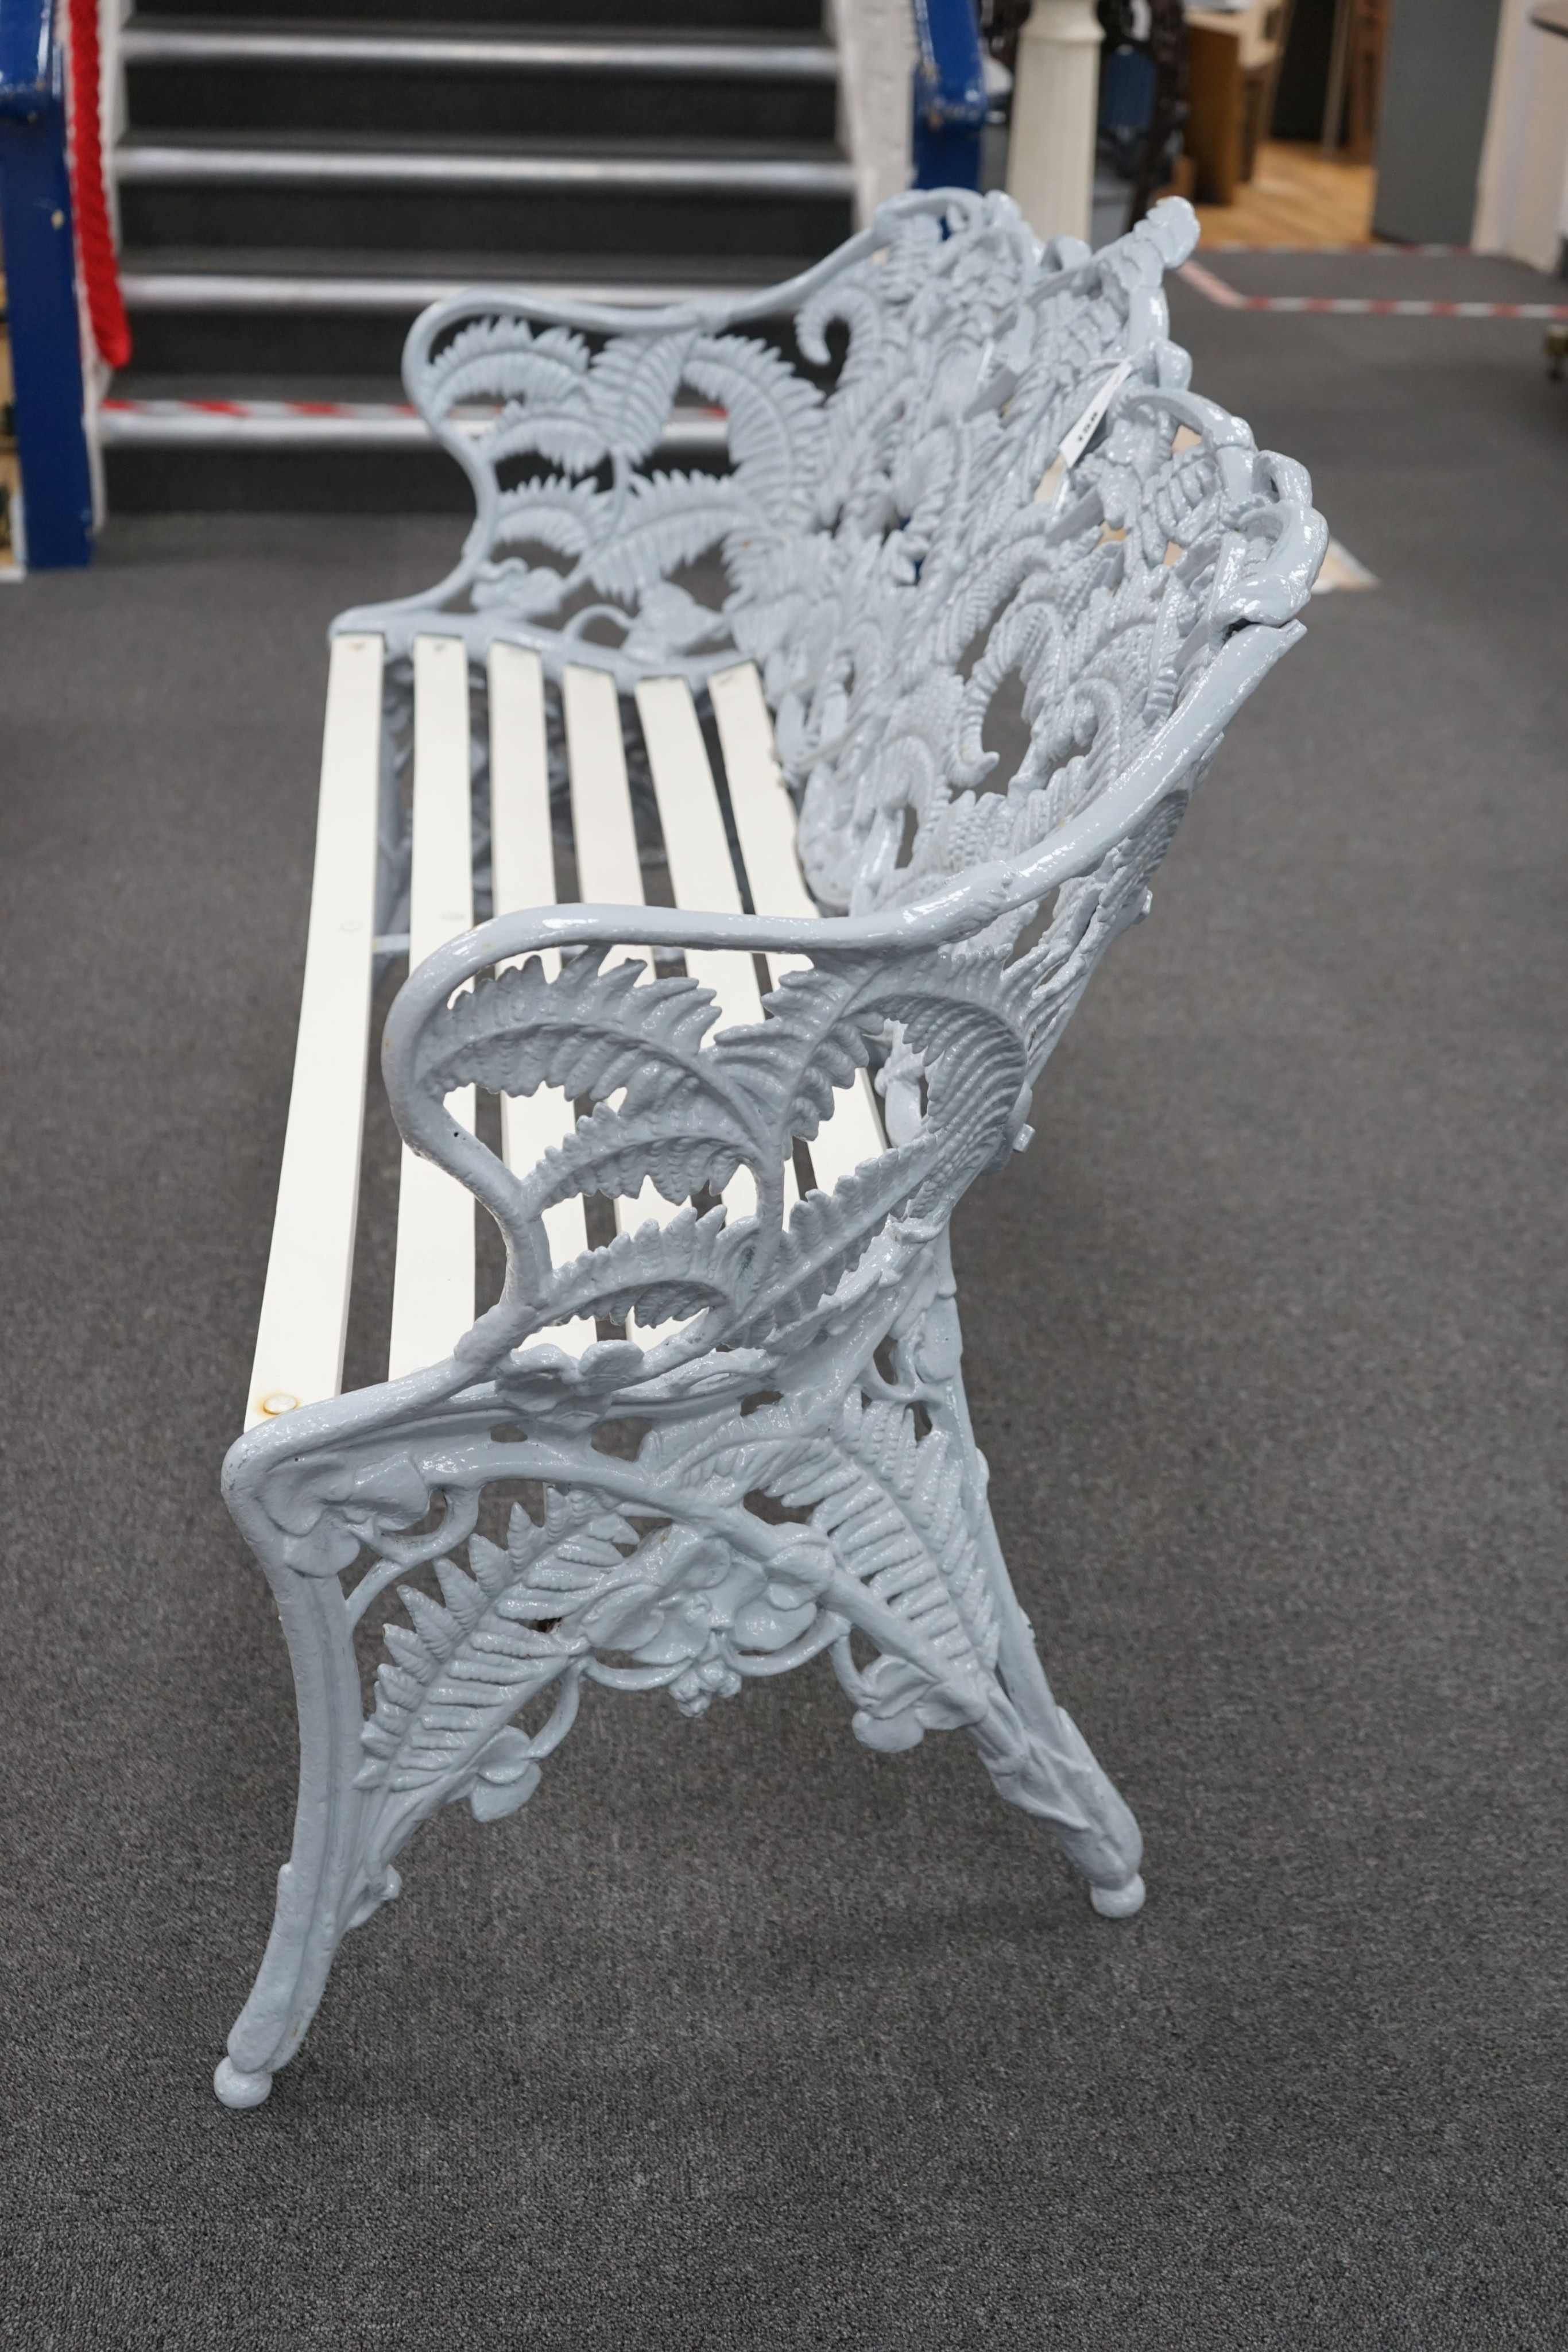 A Victorian Coalbrookdale cast iron Fern pattern garden bench, repainted and with a re-slatted wood seat, length 152cm, depth 56cm, height 94cm